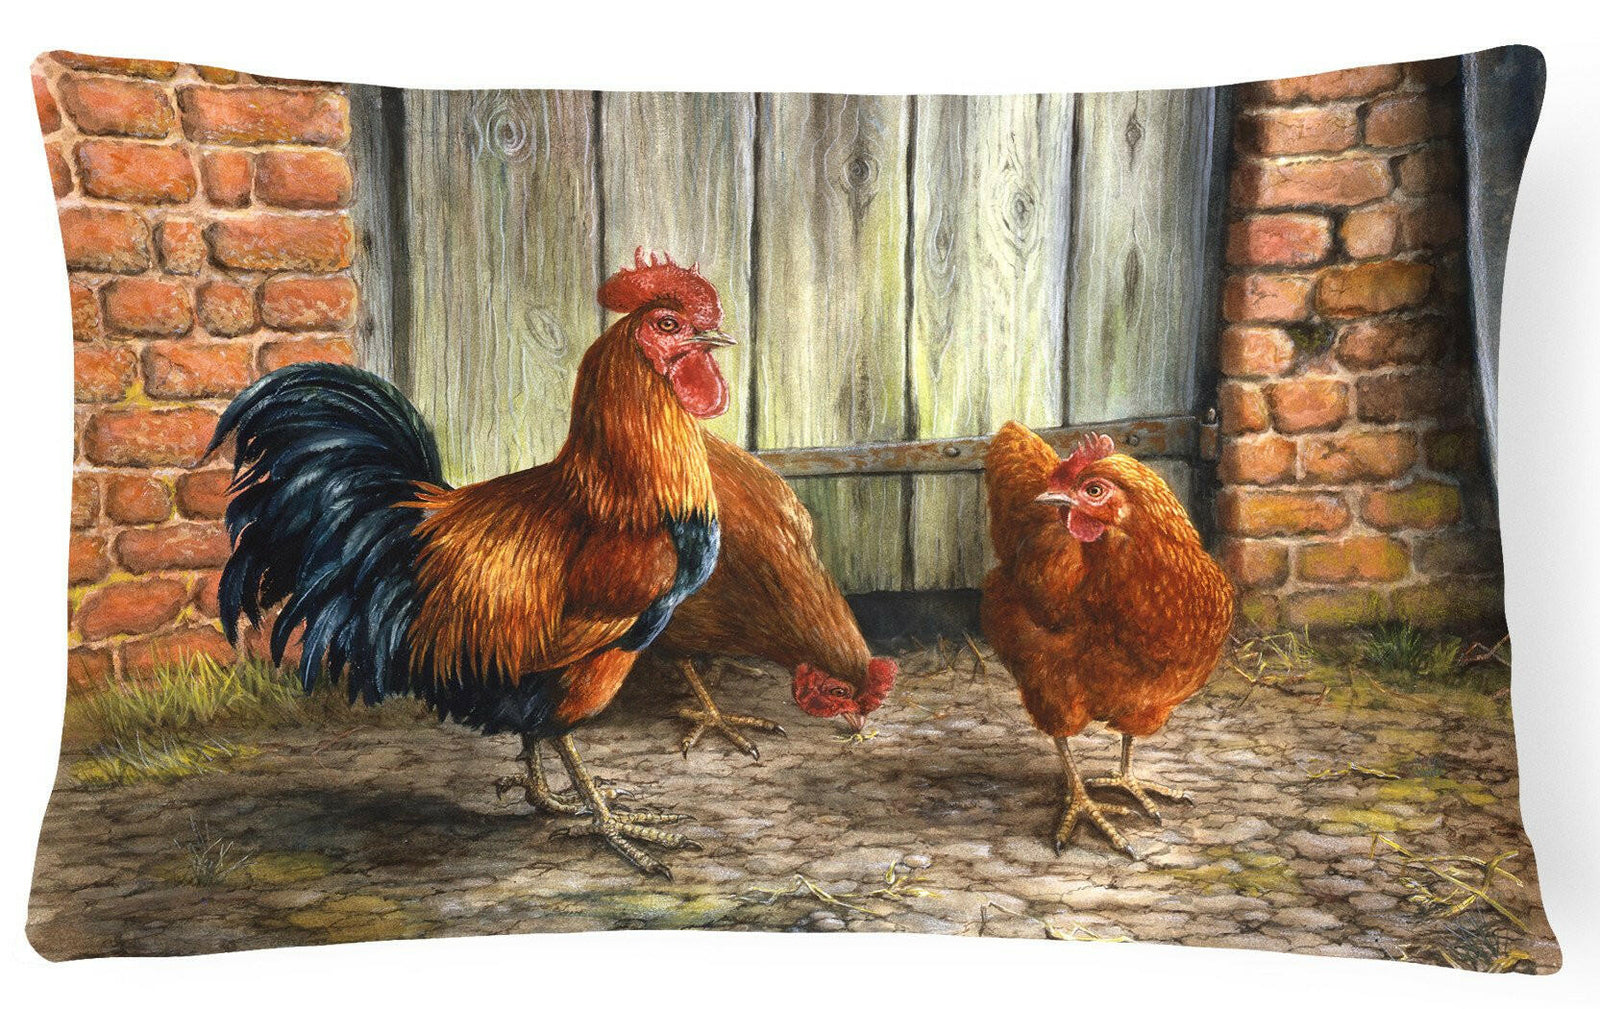 Rooster and Chickens by Daphne Baxter Fabric Decorative Pillow BDBA0056PW1216 by Caroline's Treasures